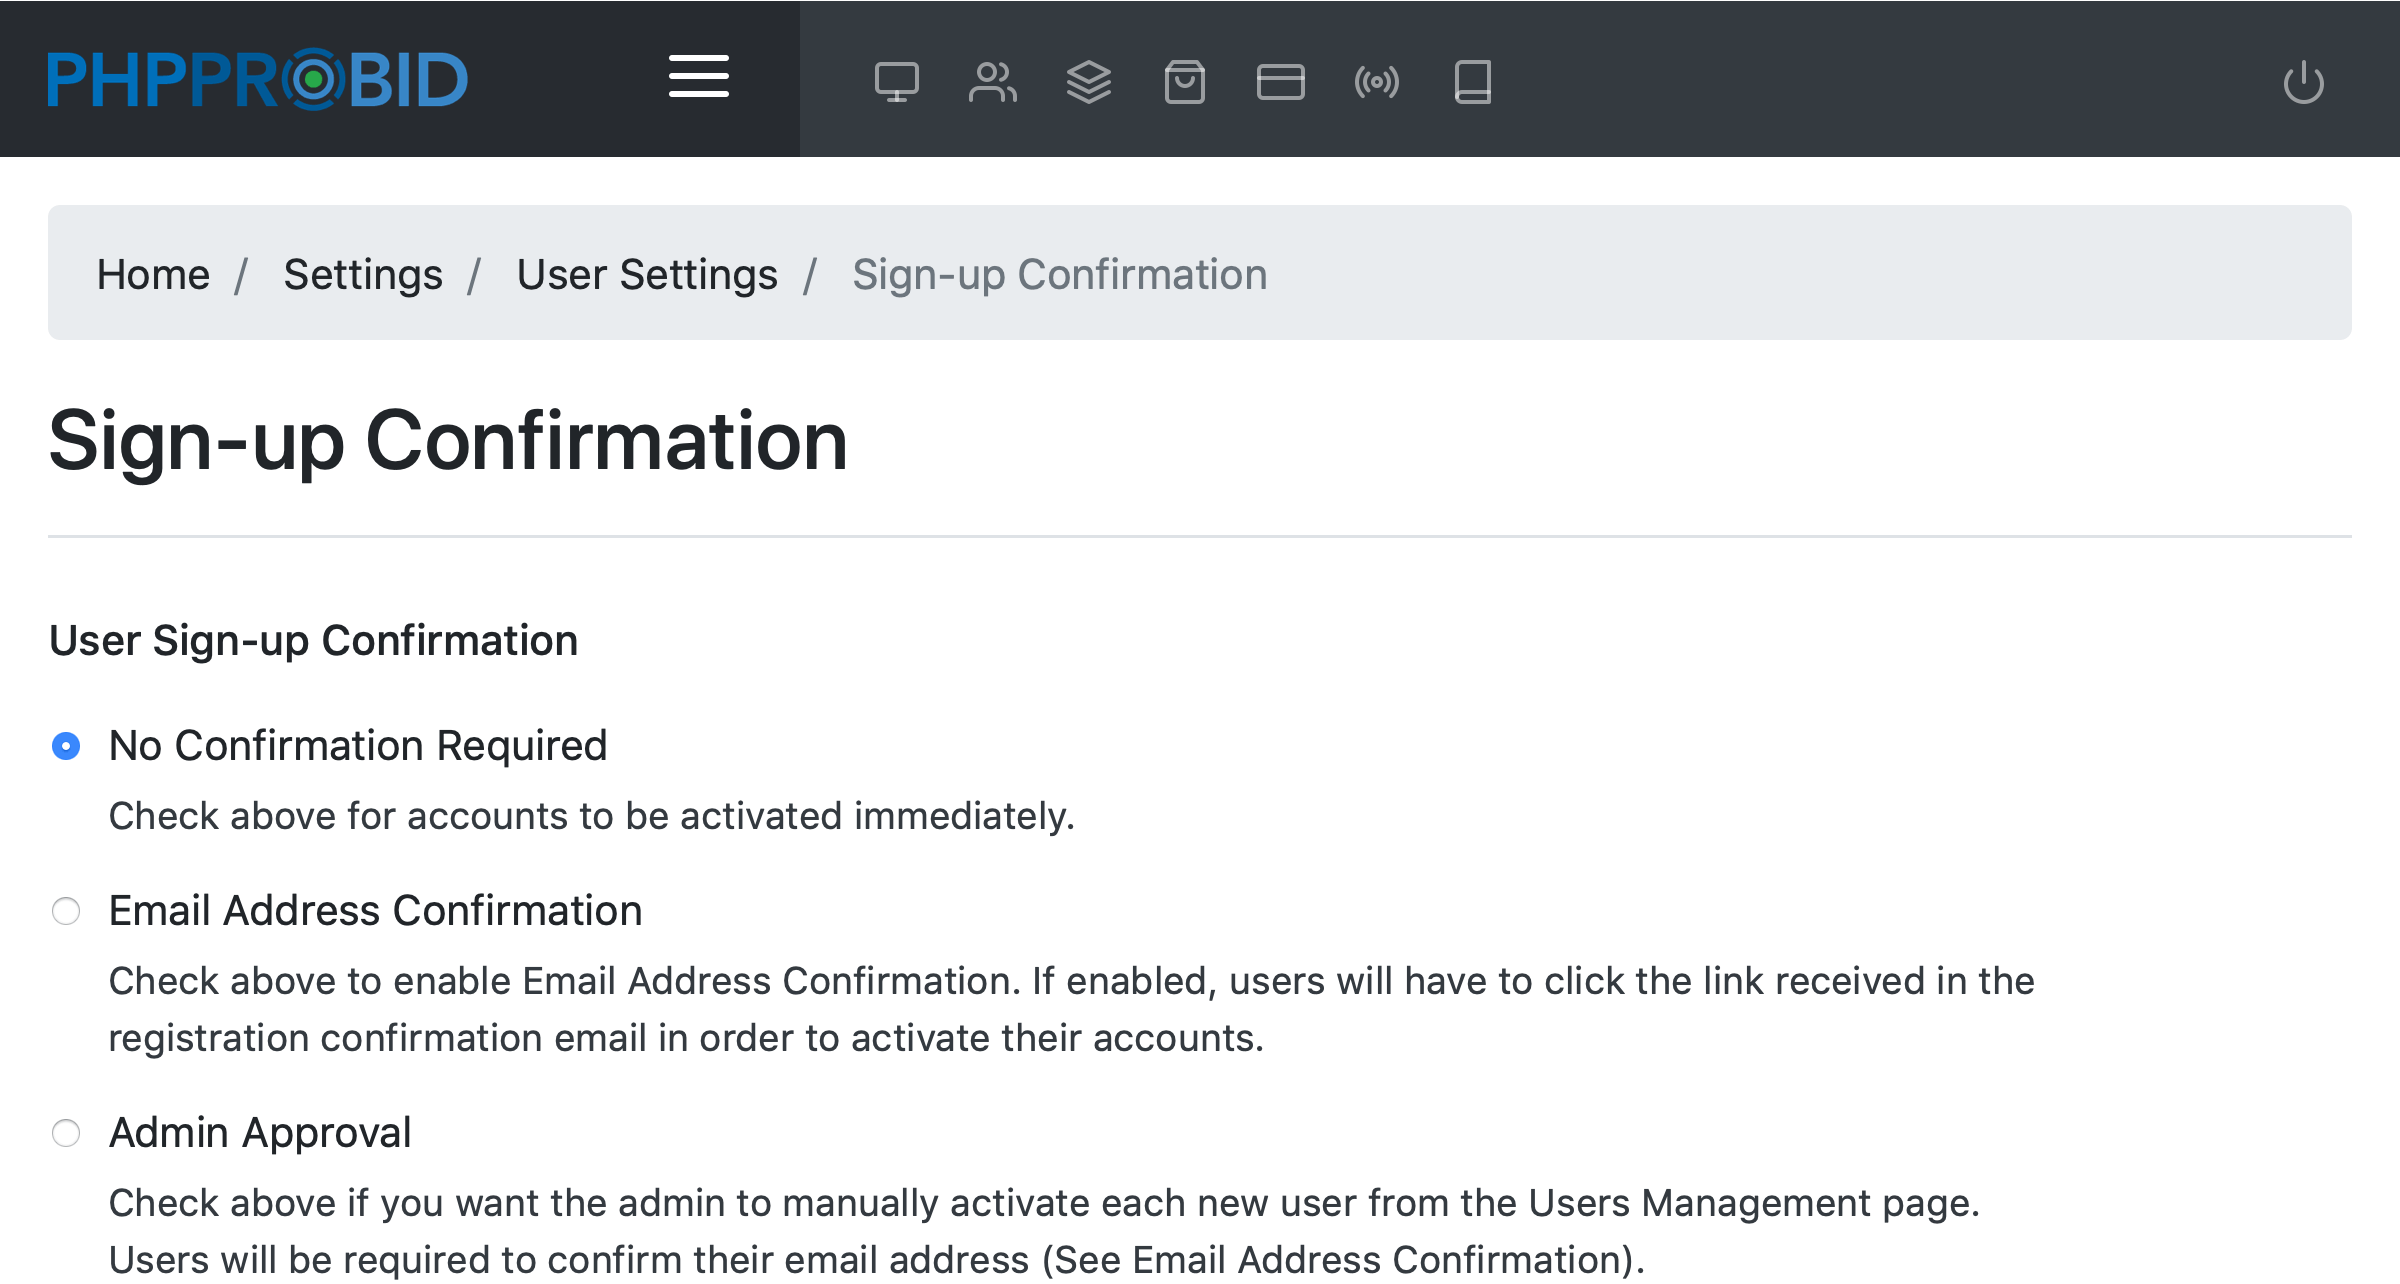 Sign-up Confirmation